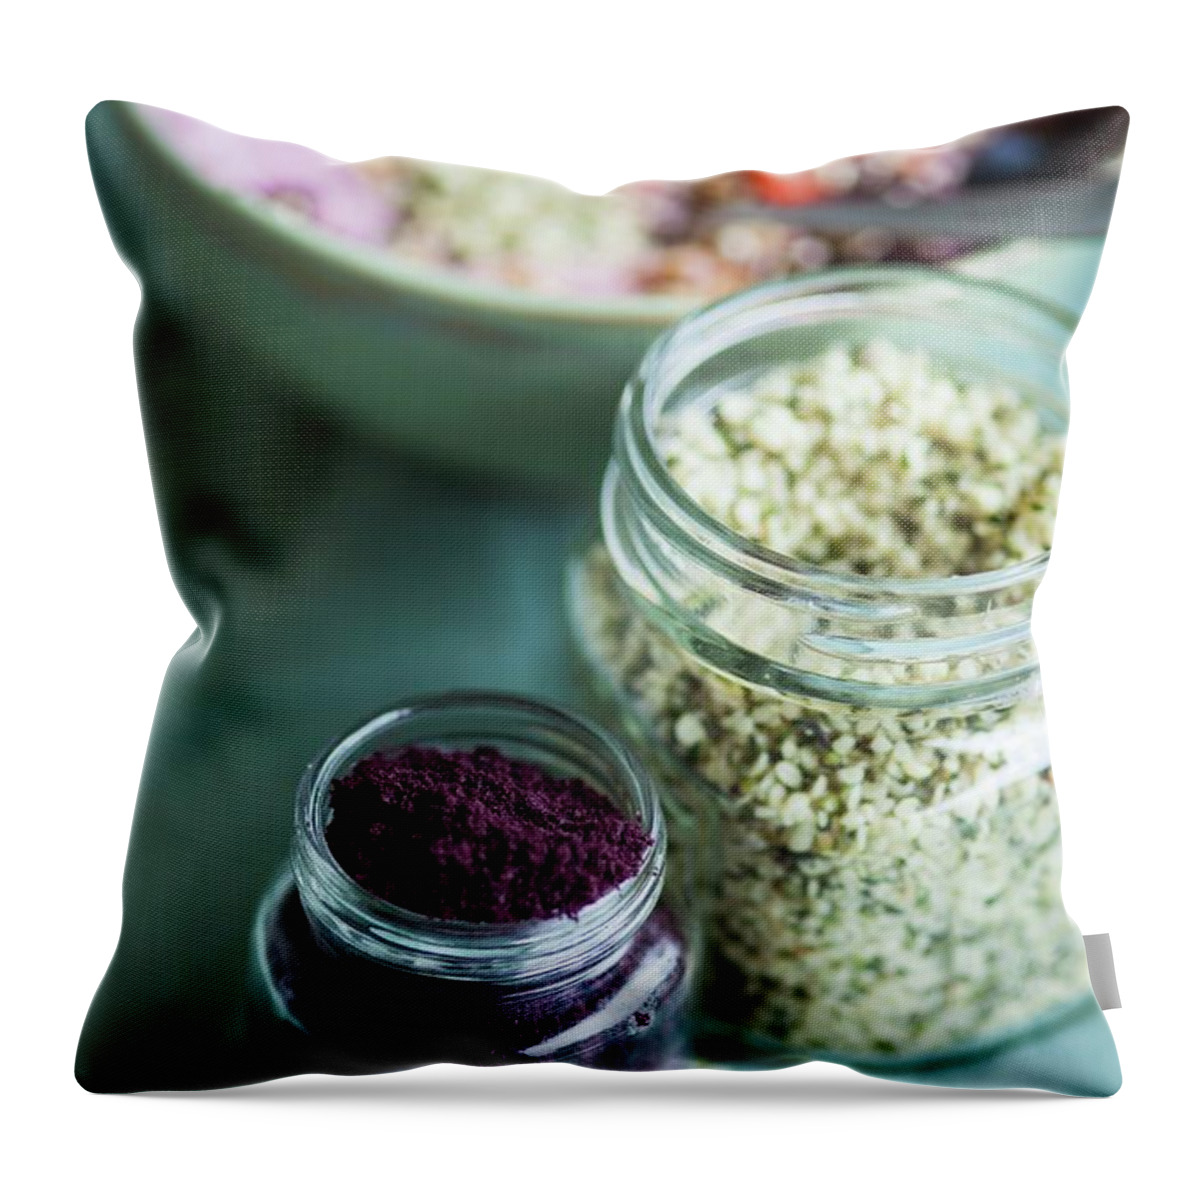 Ip_11986554 Throw Pillow featuring the photograph Superfood Ingredients: Hemp And Acai Powder In Glass Jars by Eising Studio